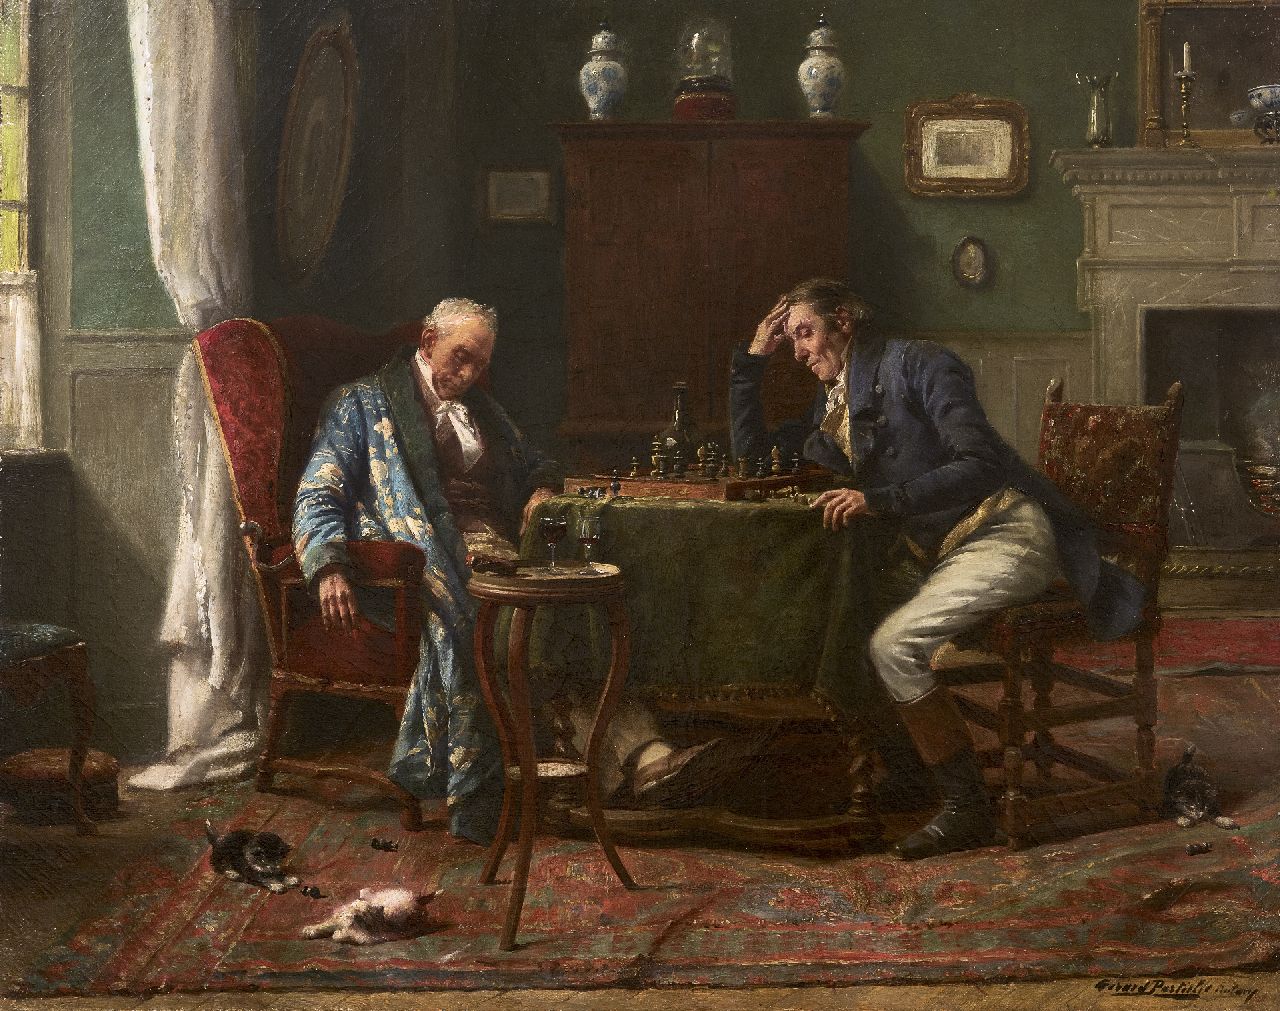 Portielje G.J.  | 'Gerard' Joseph Portielje | Paintings offered for sale | The chess game, oil on canvas 46.7 x 58.5 cm, signed l.r.